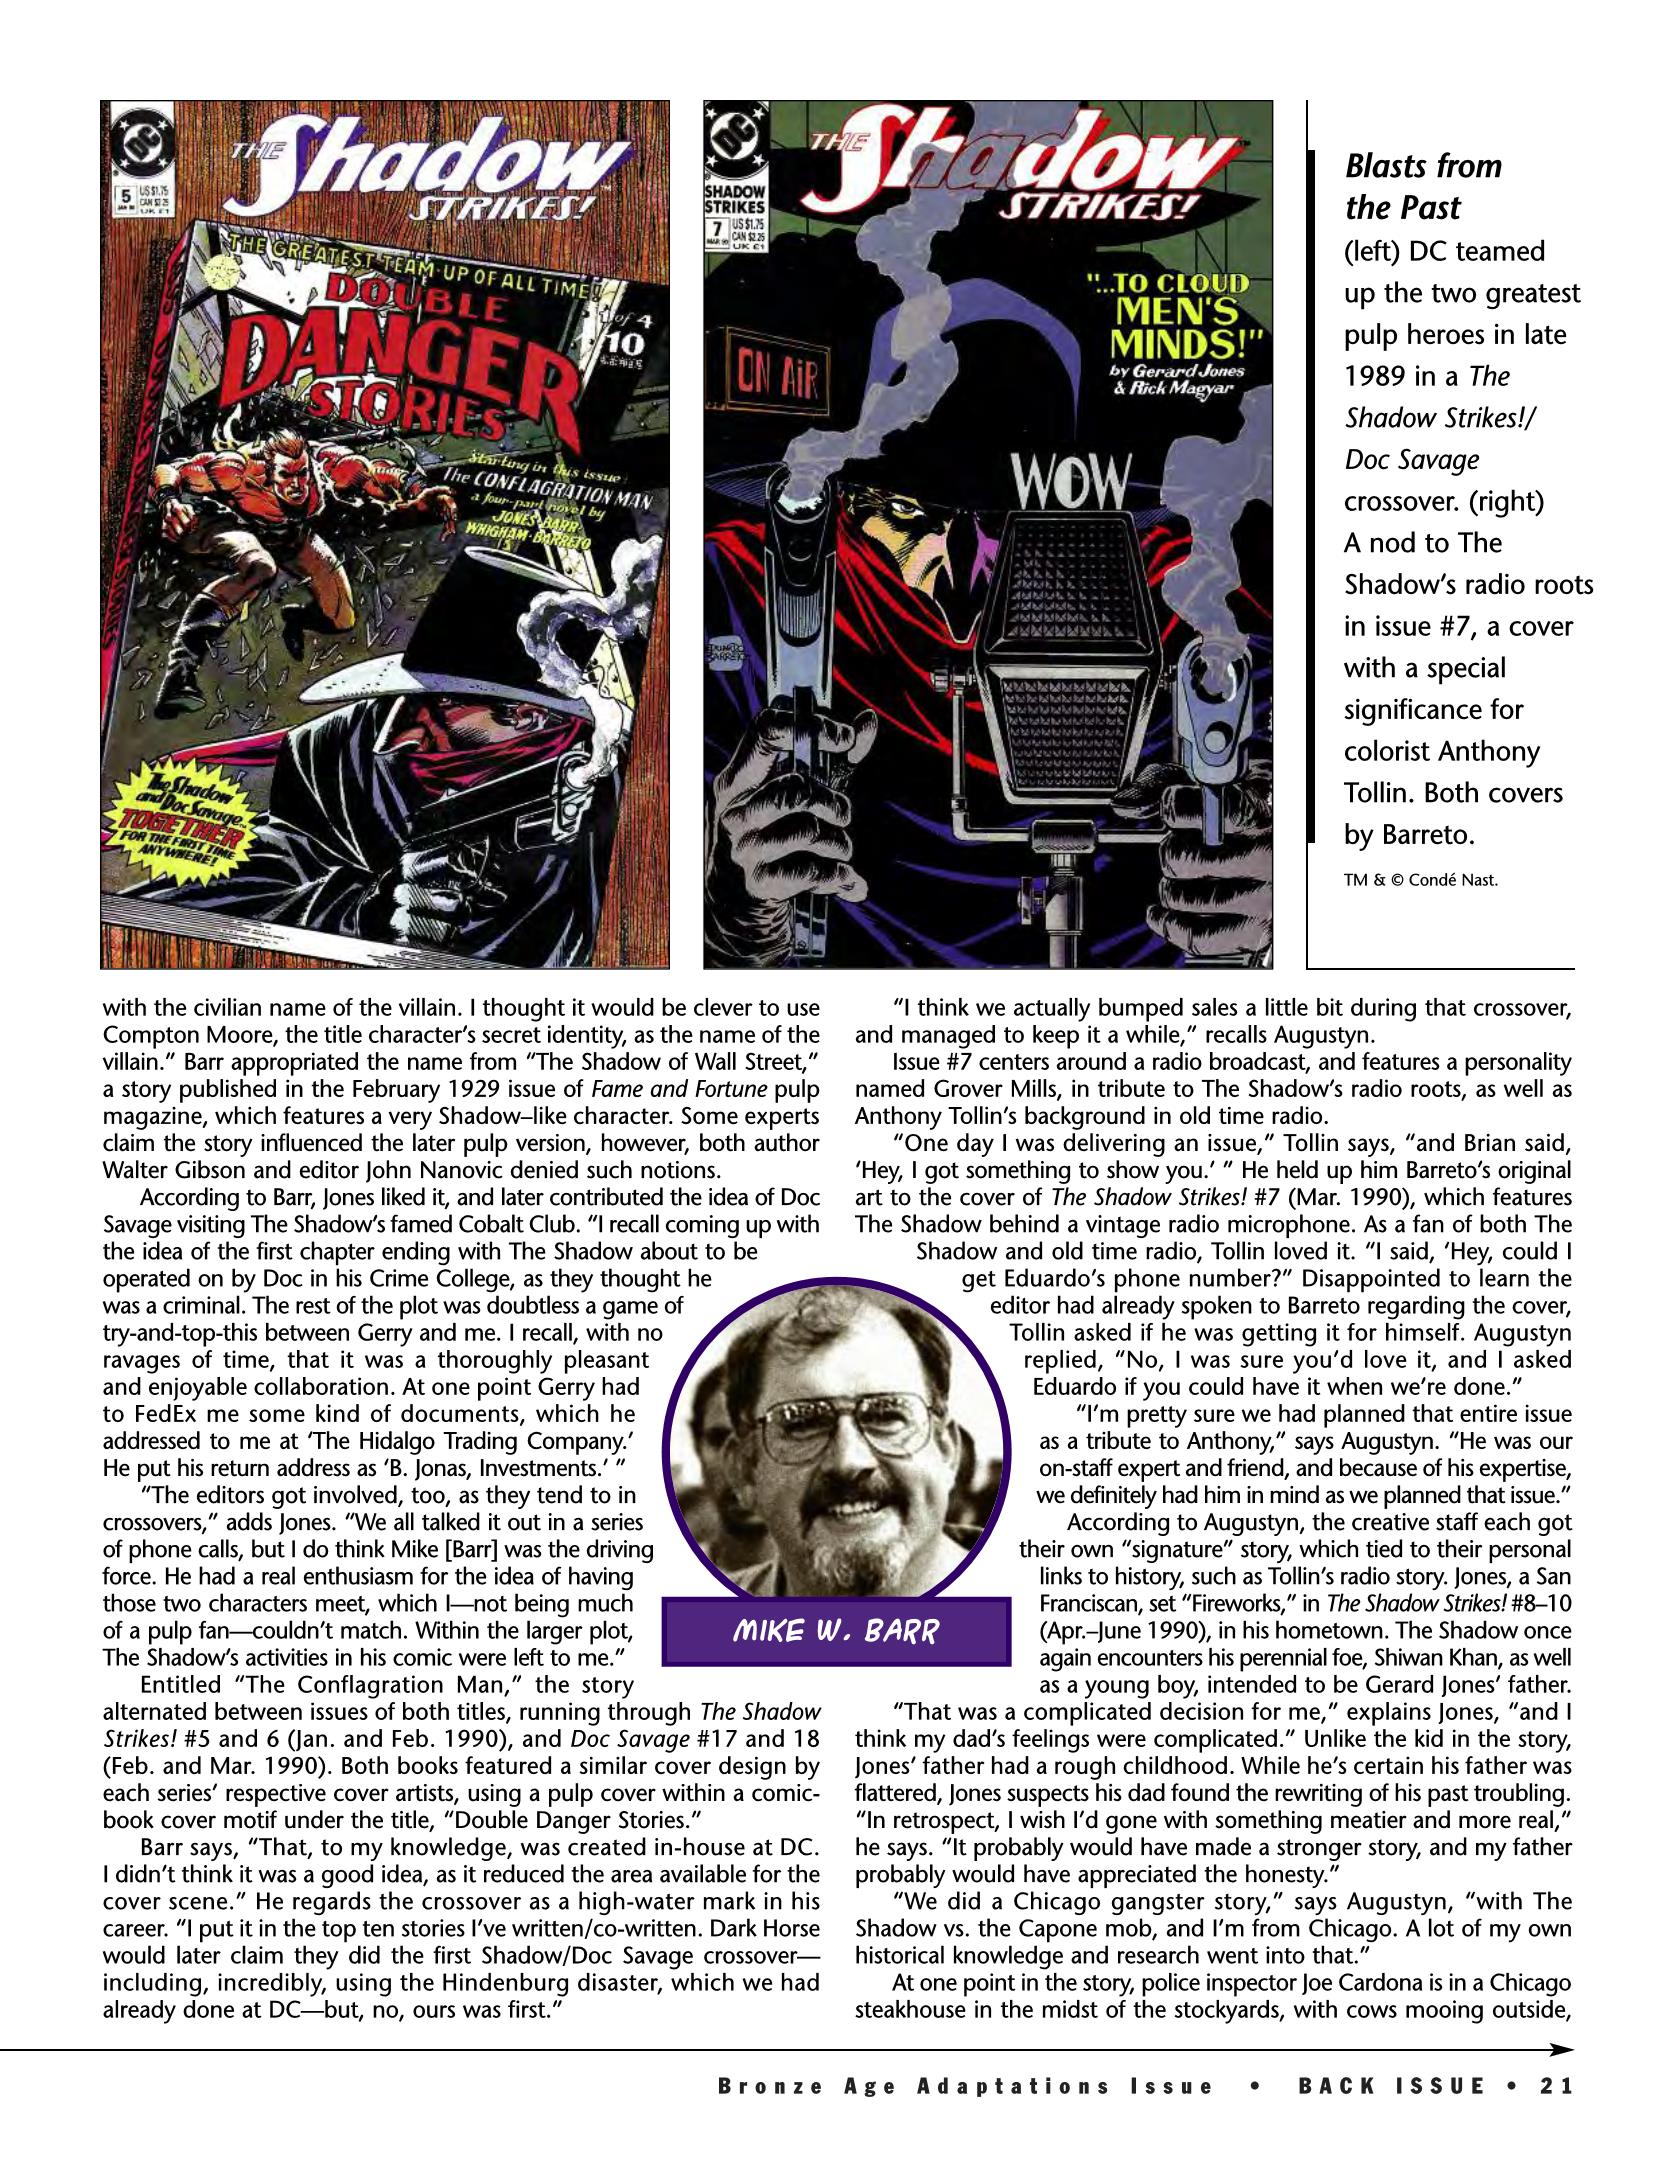 Read online Back Issue comic -  Issue #89 - 16